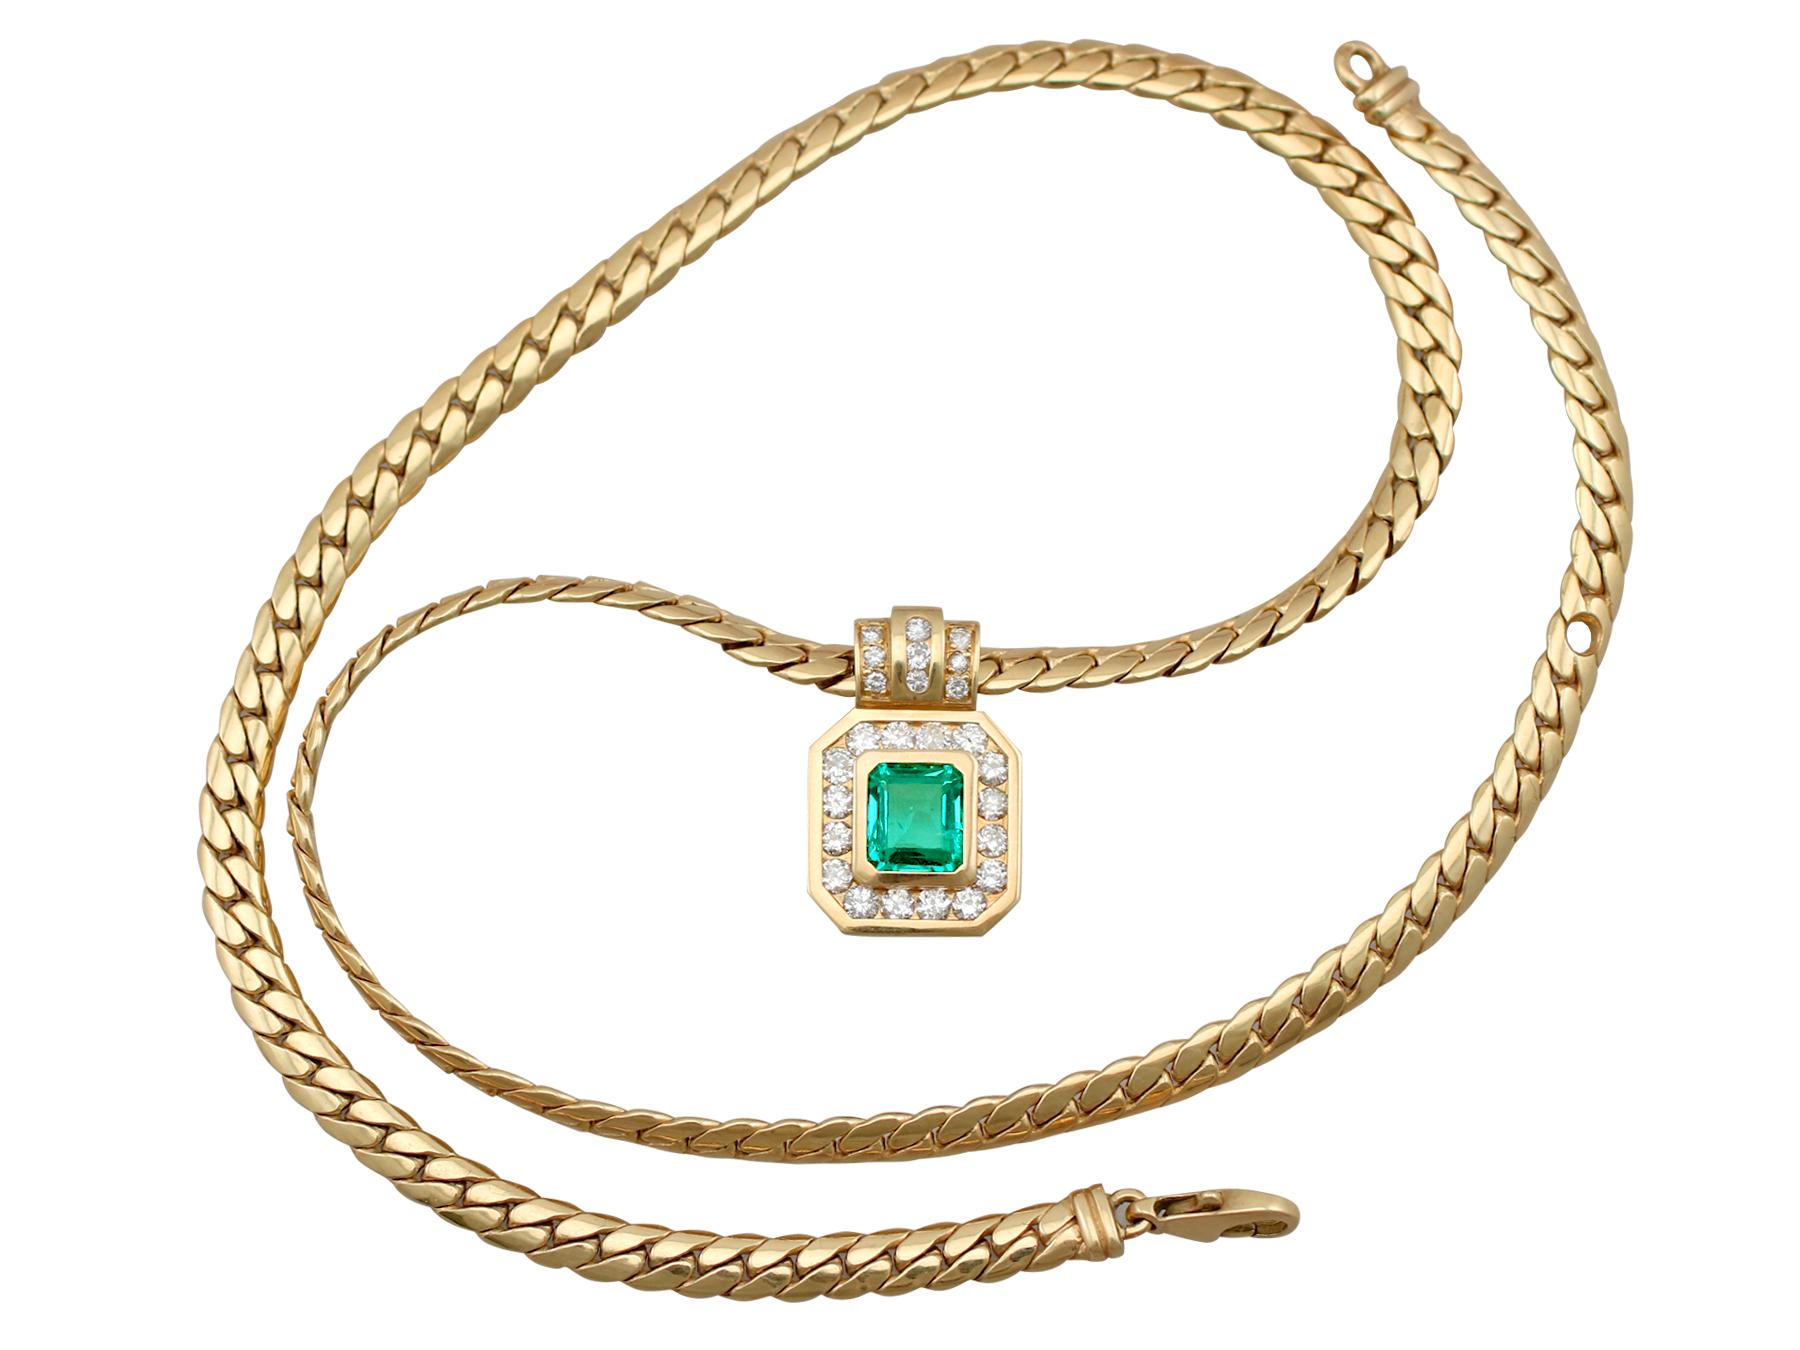 A stunning vintage French 1.50 carat Colombian emerald and 1.38 carat diamond, 18 karat yellow gold necklace; part of our diverse vintage jewellery and estate jewelry collections.

This stunning, fine and impressive vintage emerald necklace has been